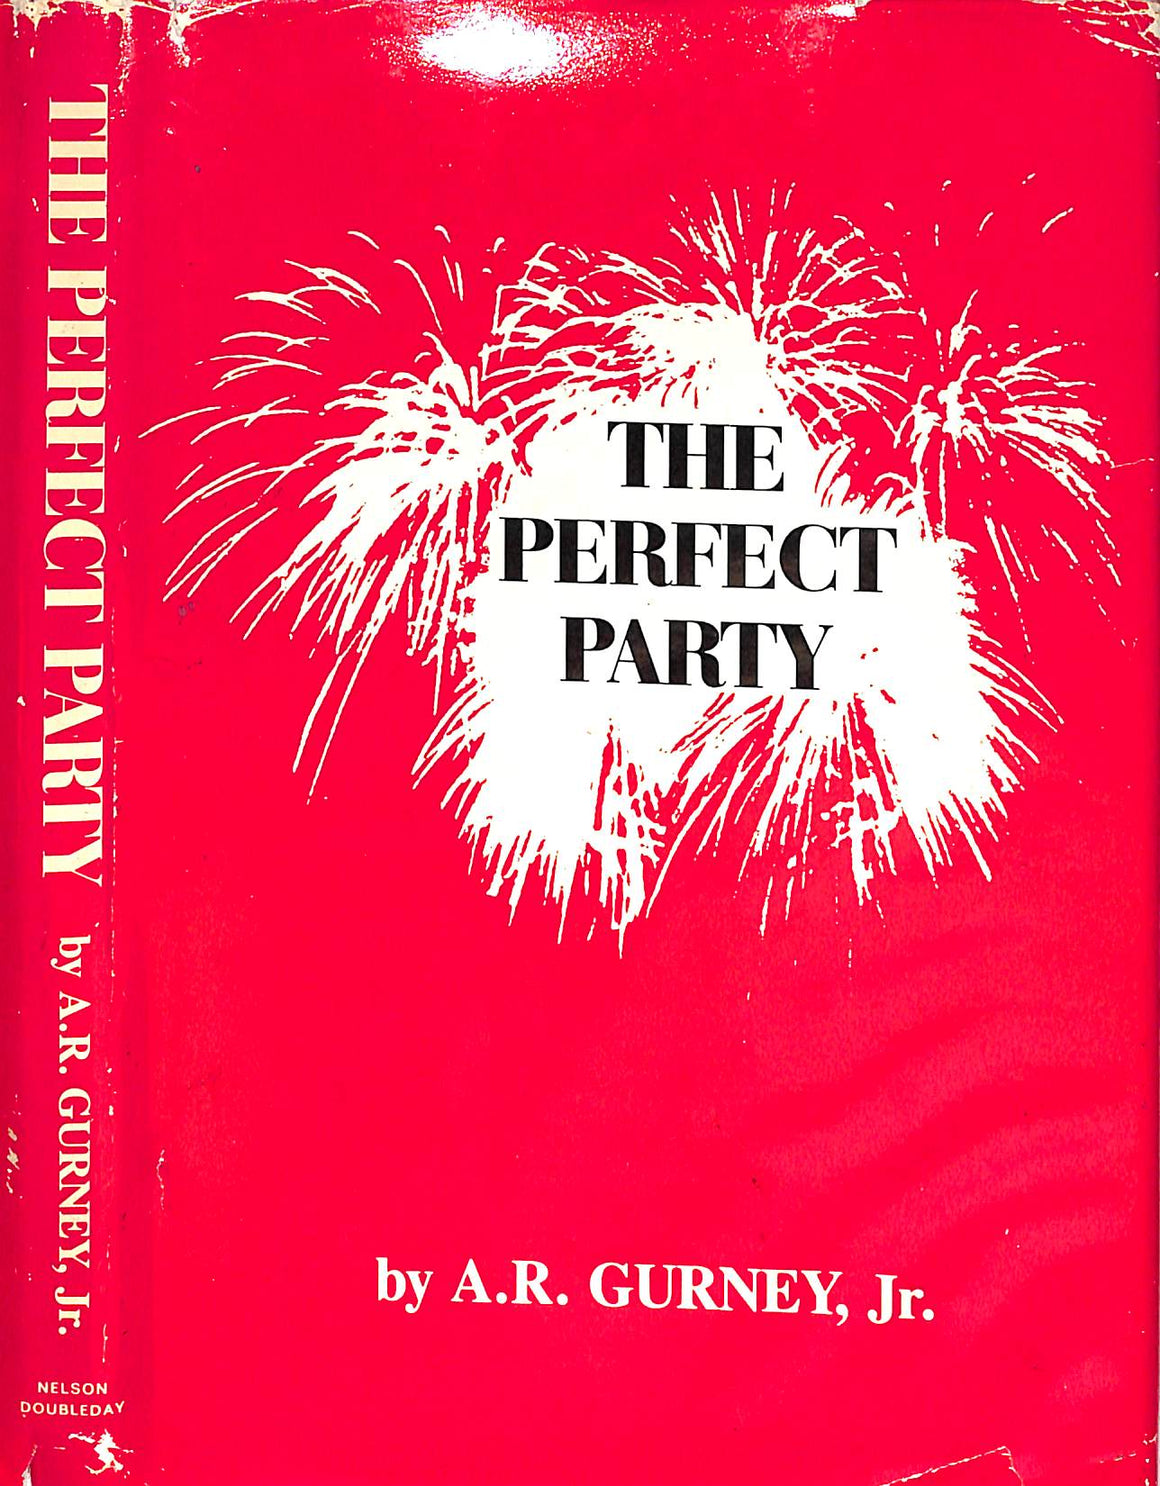 "The Perfect Party" 1986 GURNEY, A.R., Jr.